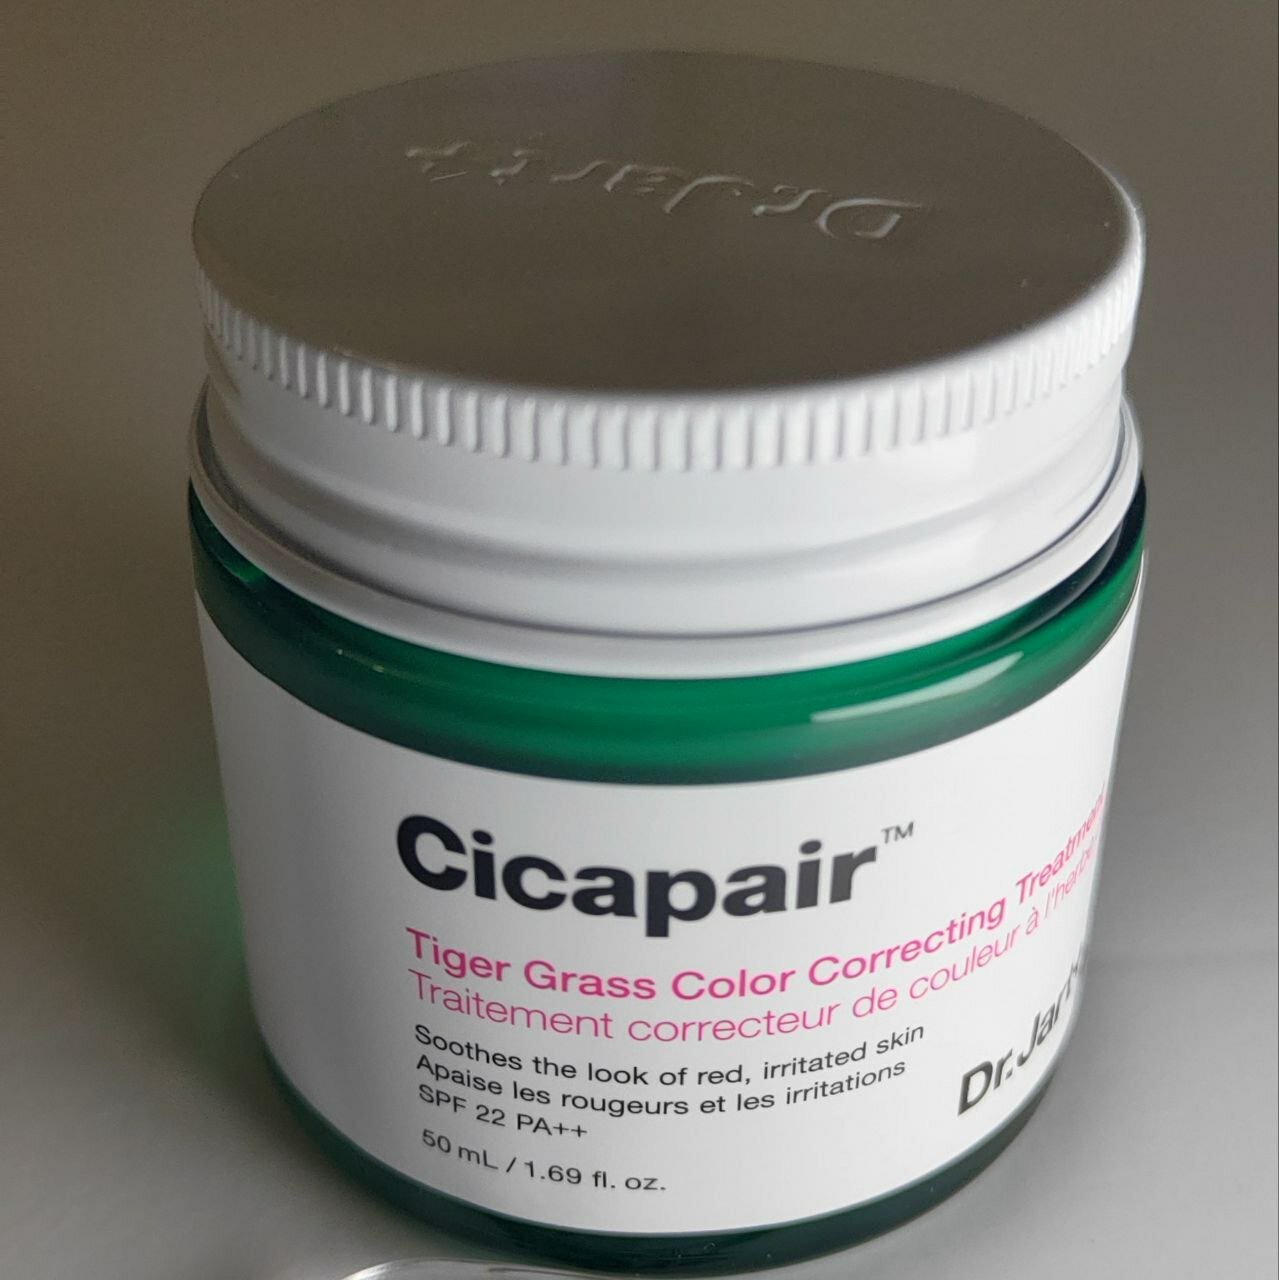 Cicapair Tiger Glass Color Correcting Treatment SPF22 50ml